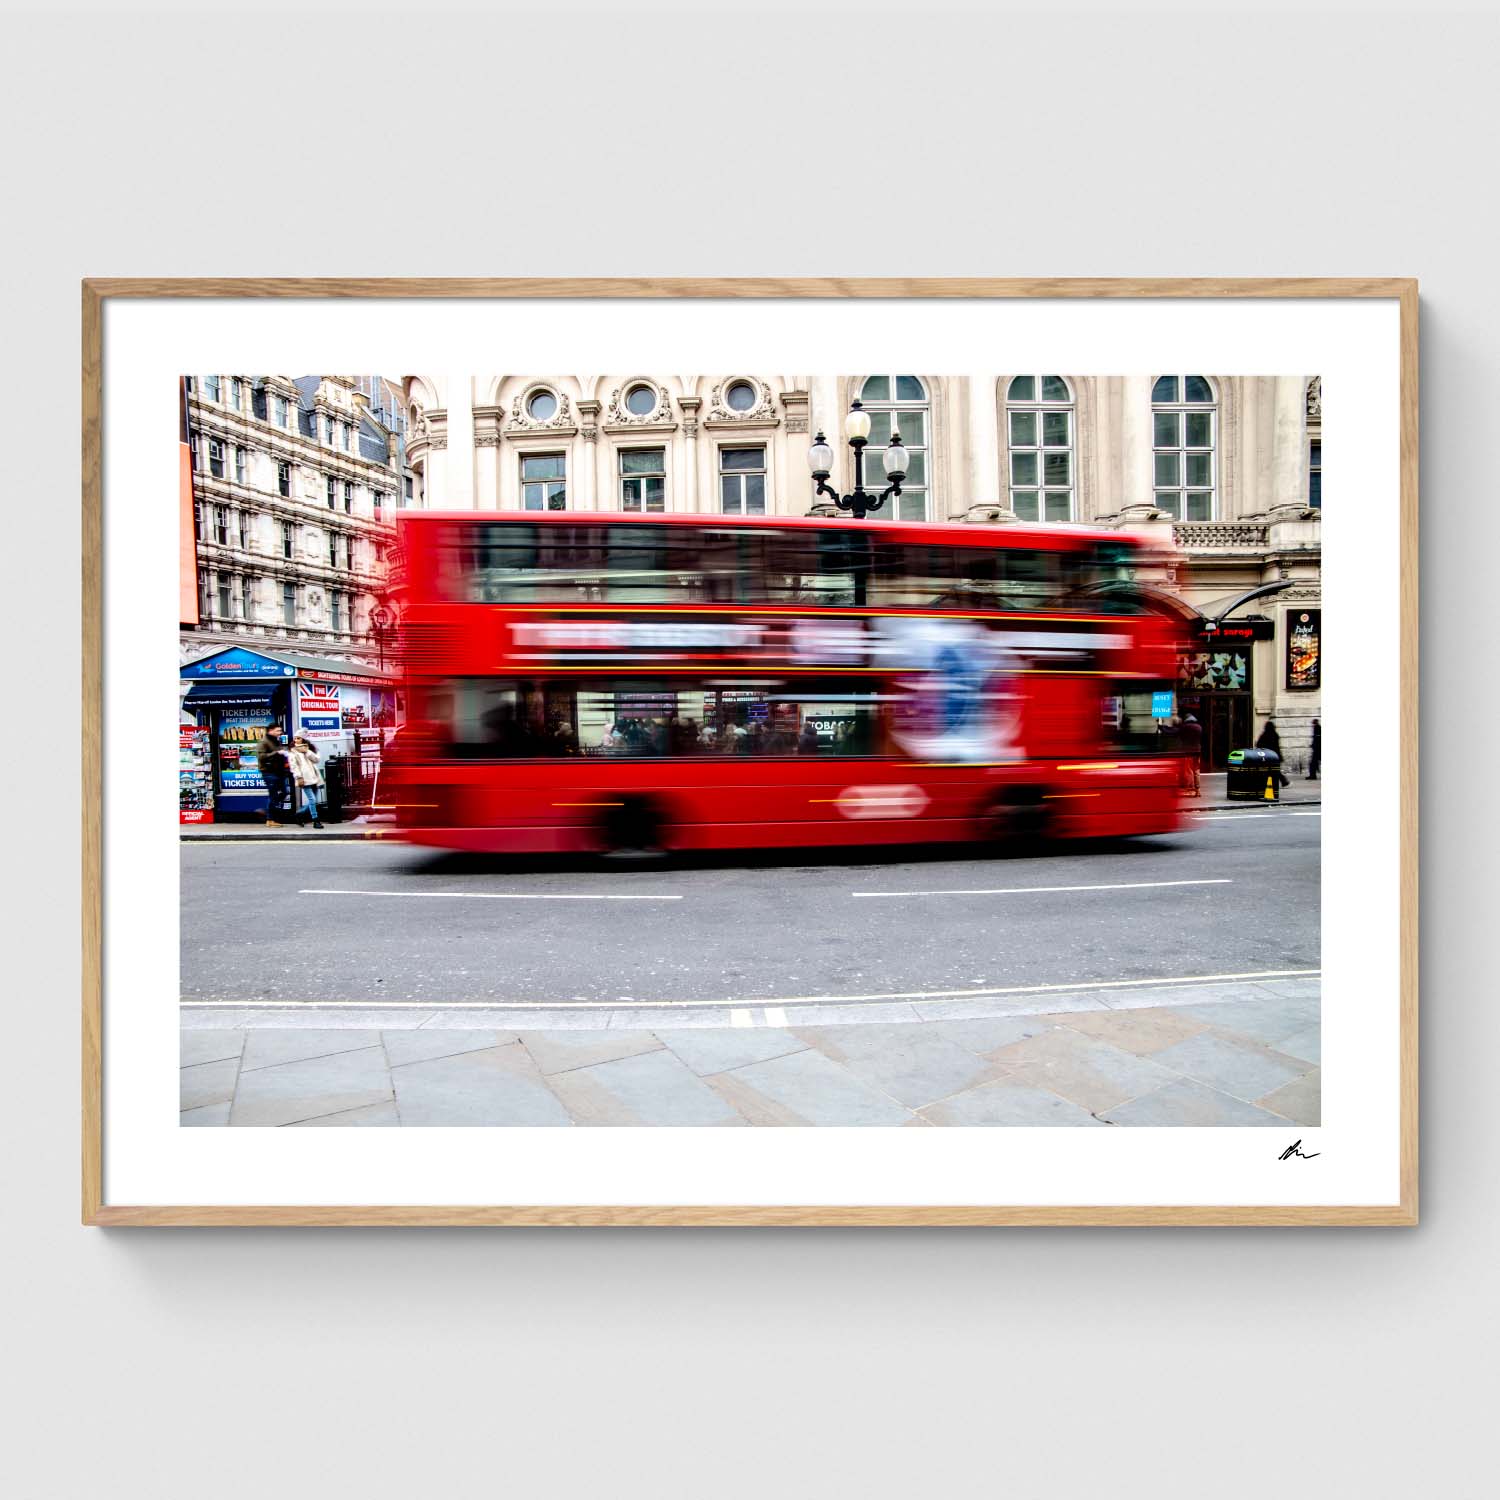 Marco Polo Mart Intakt London poster - Poster of a classic red bus in London - By Boel